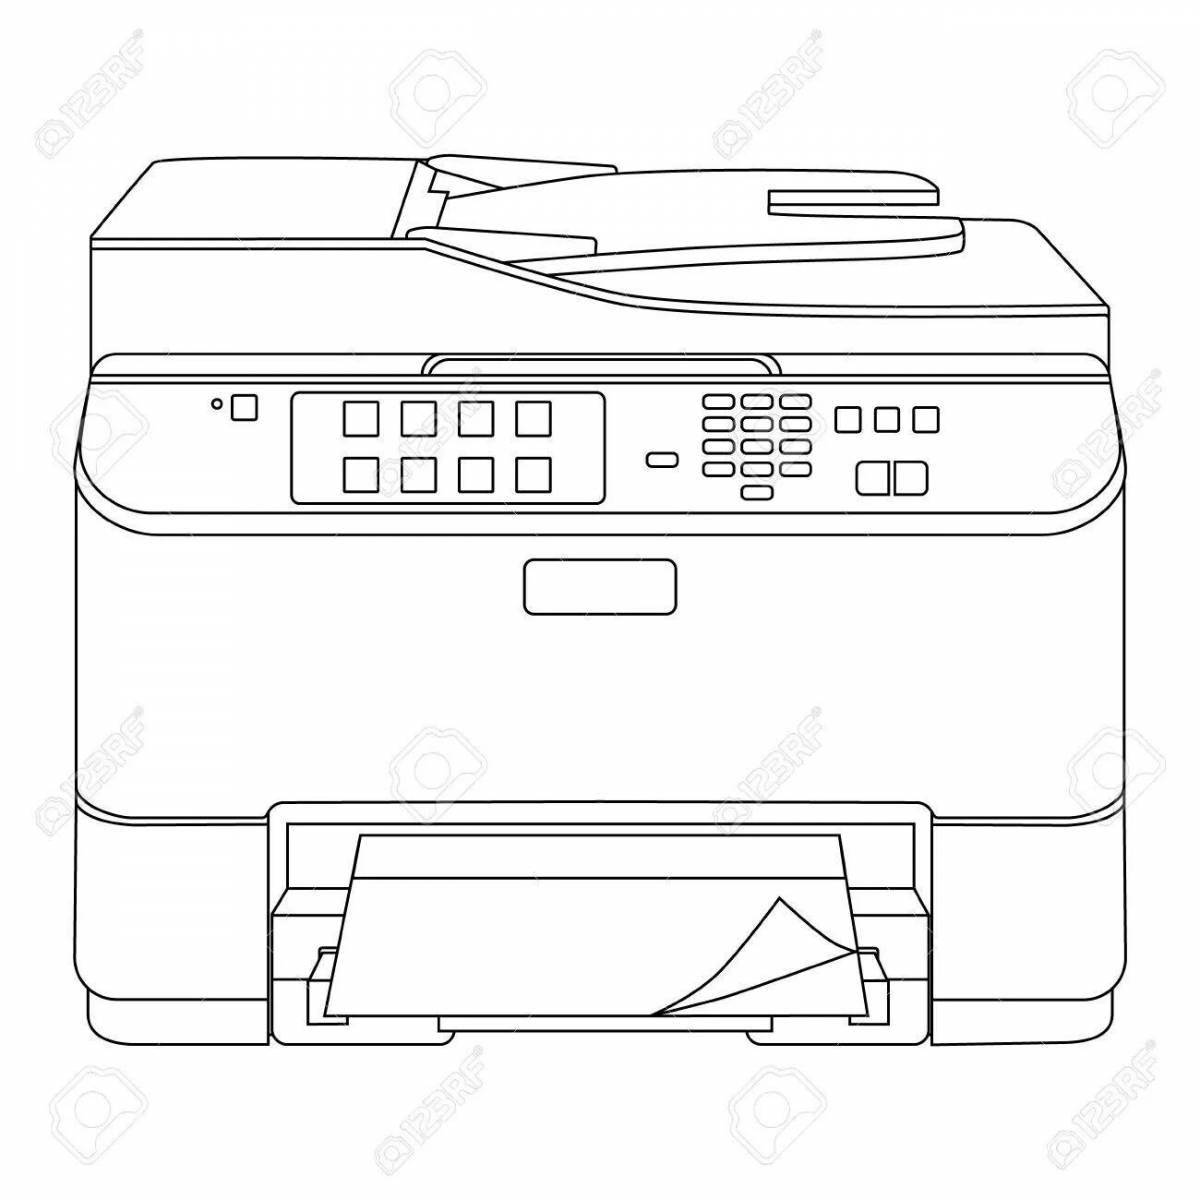 Coloring book for children with color printer